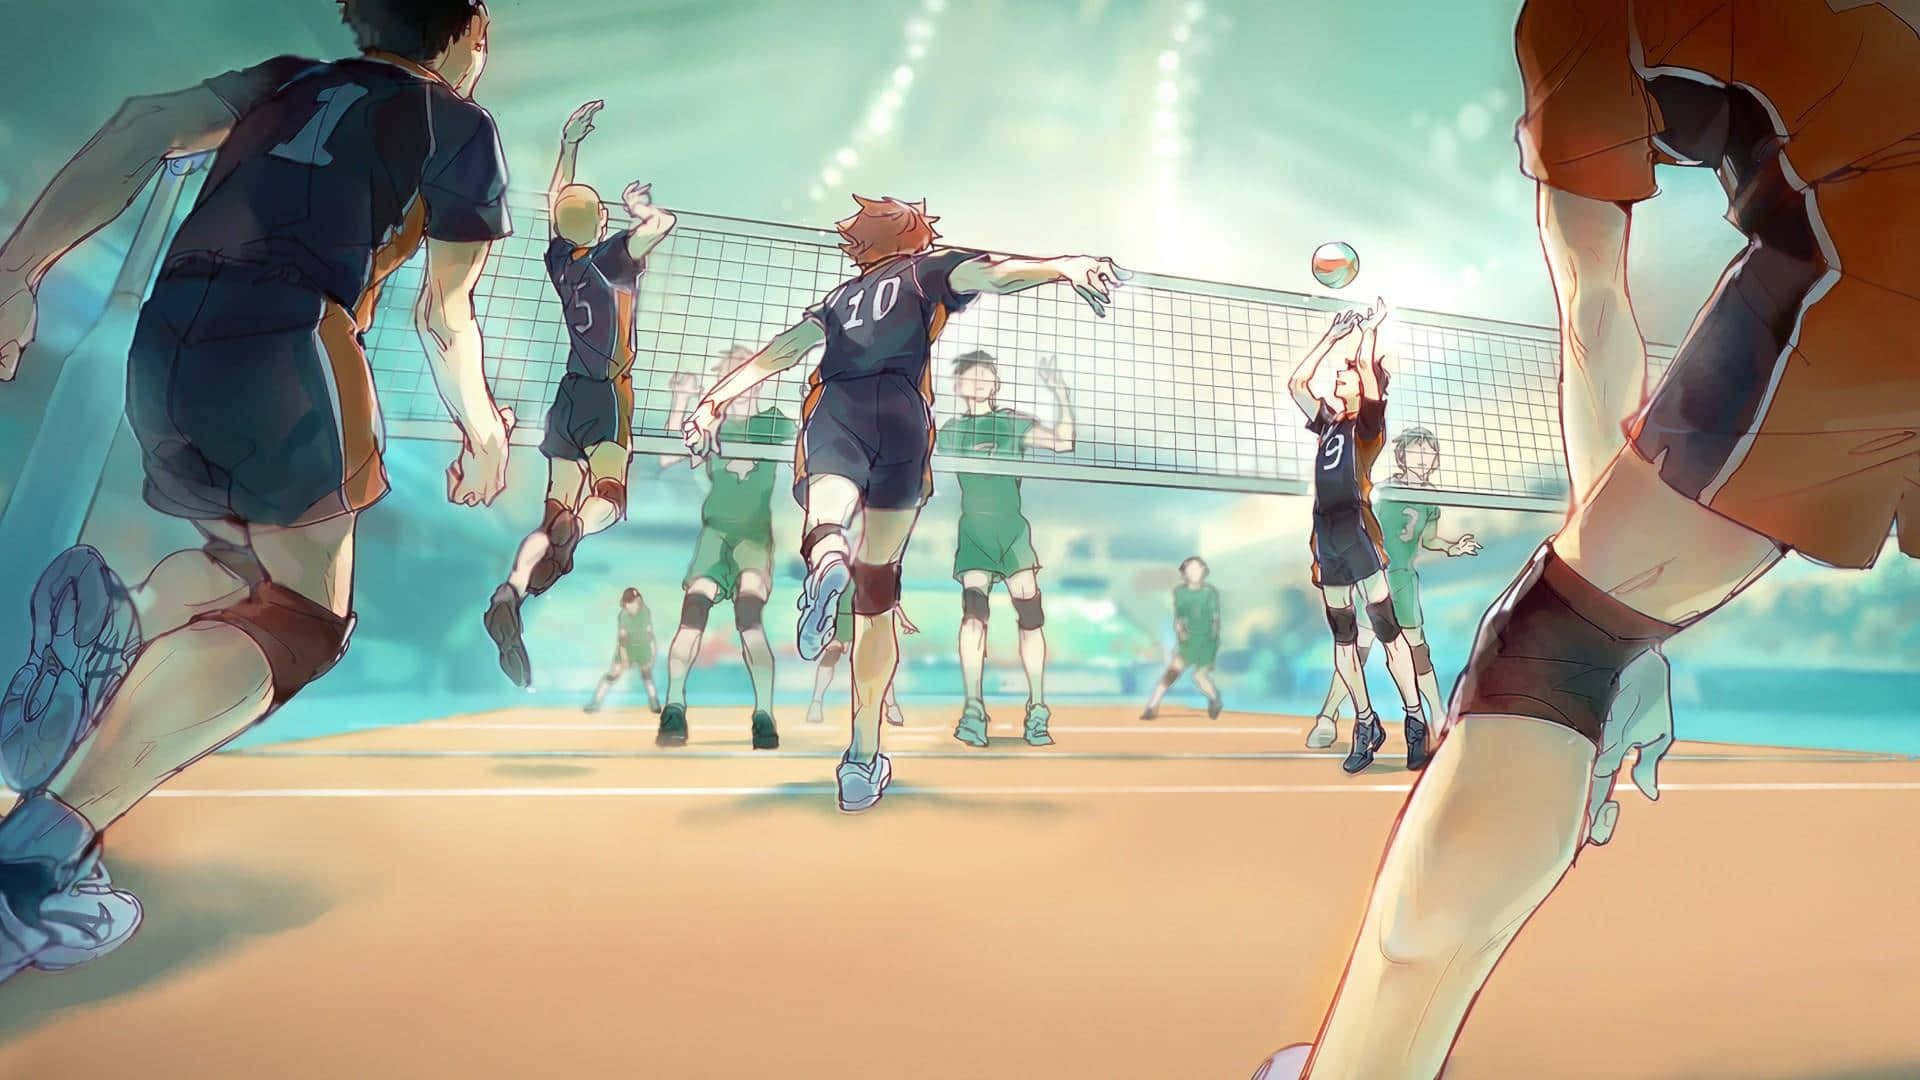 An aesthetic desktop inspired by the hit sports anime series "Haikyuu!" Wallpaper